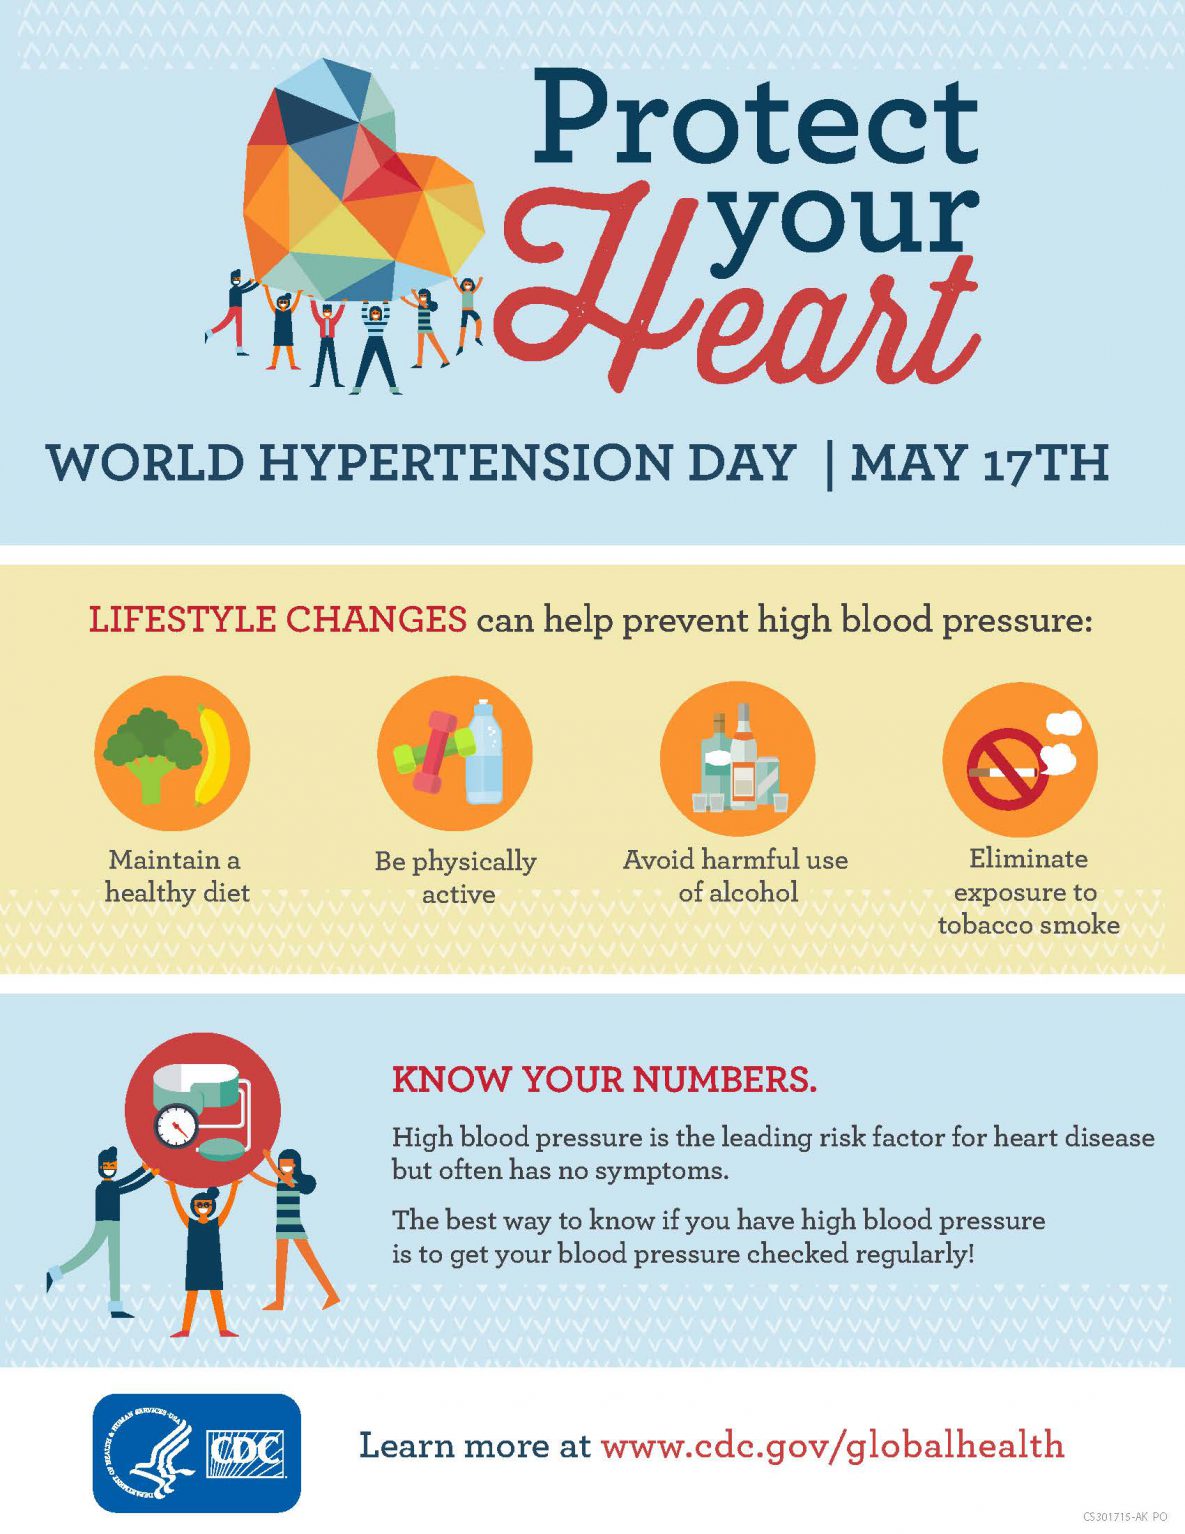 world hypertension day protect your heart